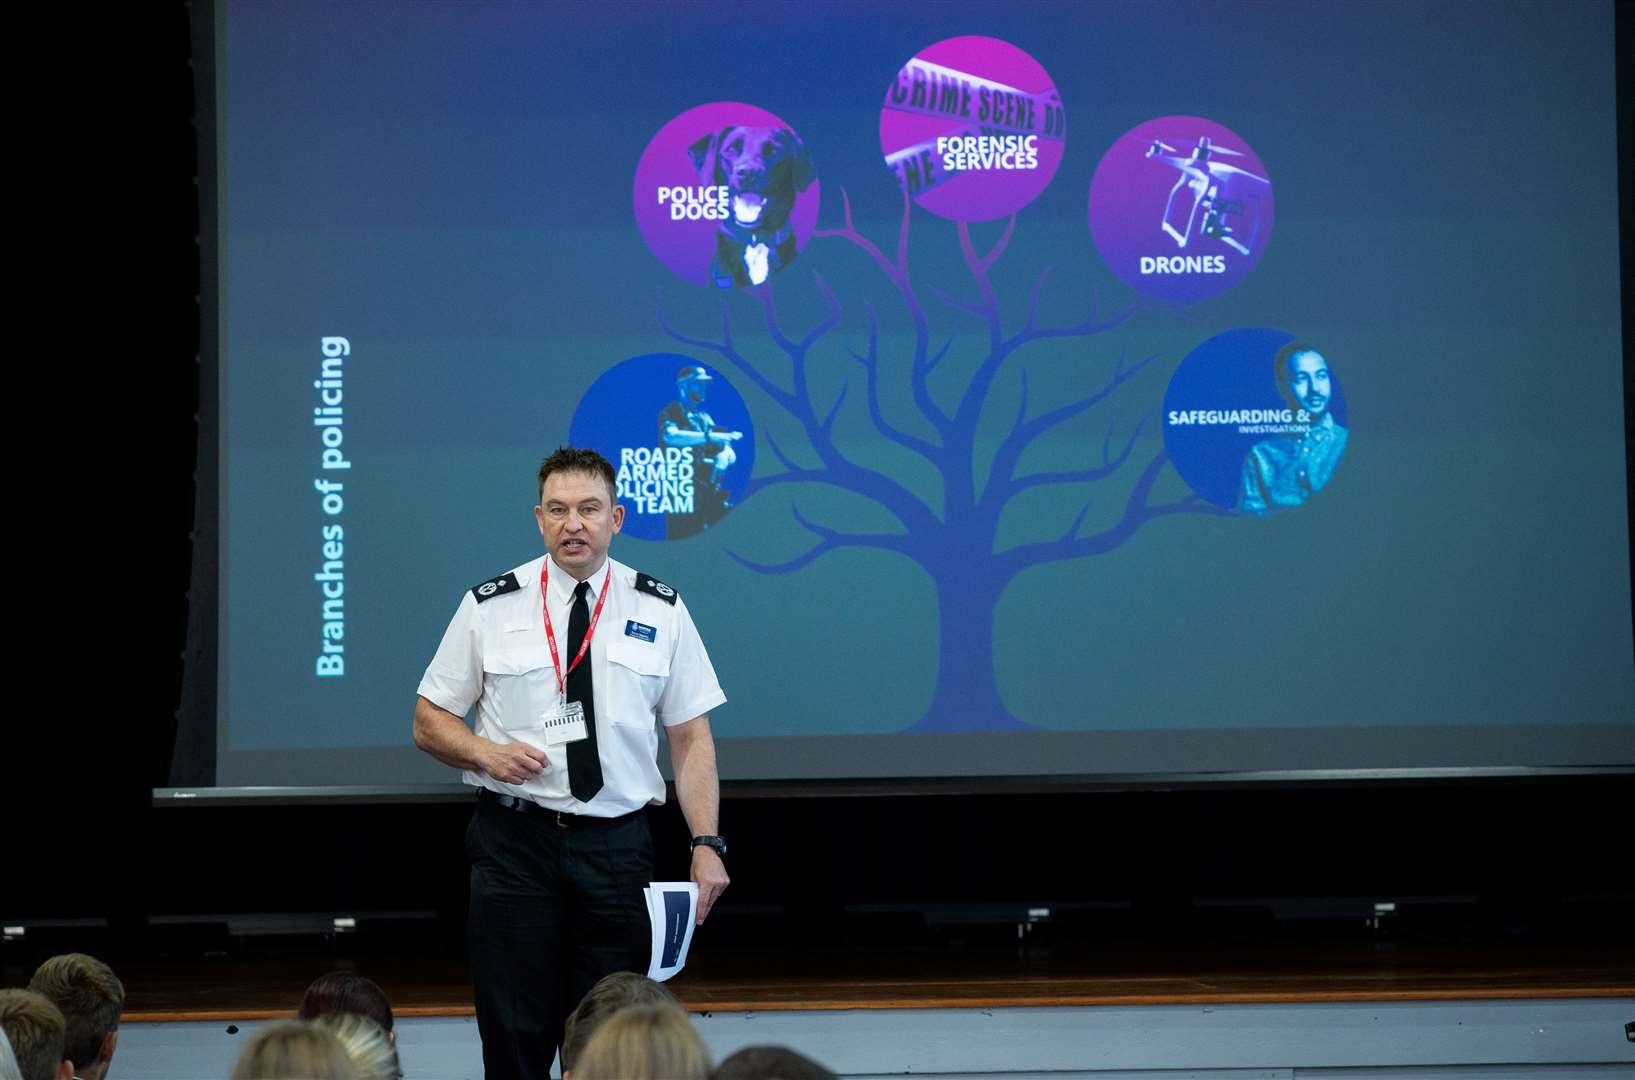 Detective Chief Constable Simon Megicks spoke about his career to pupils at Springwood High School.